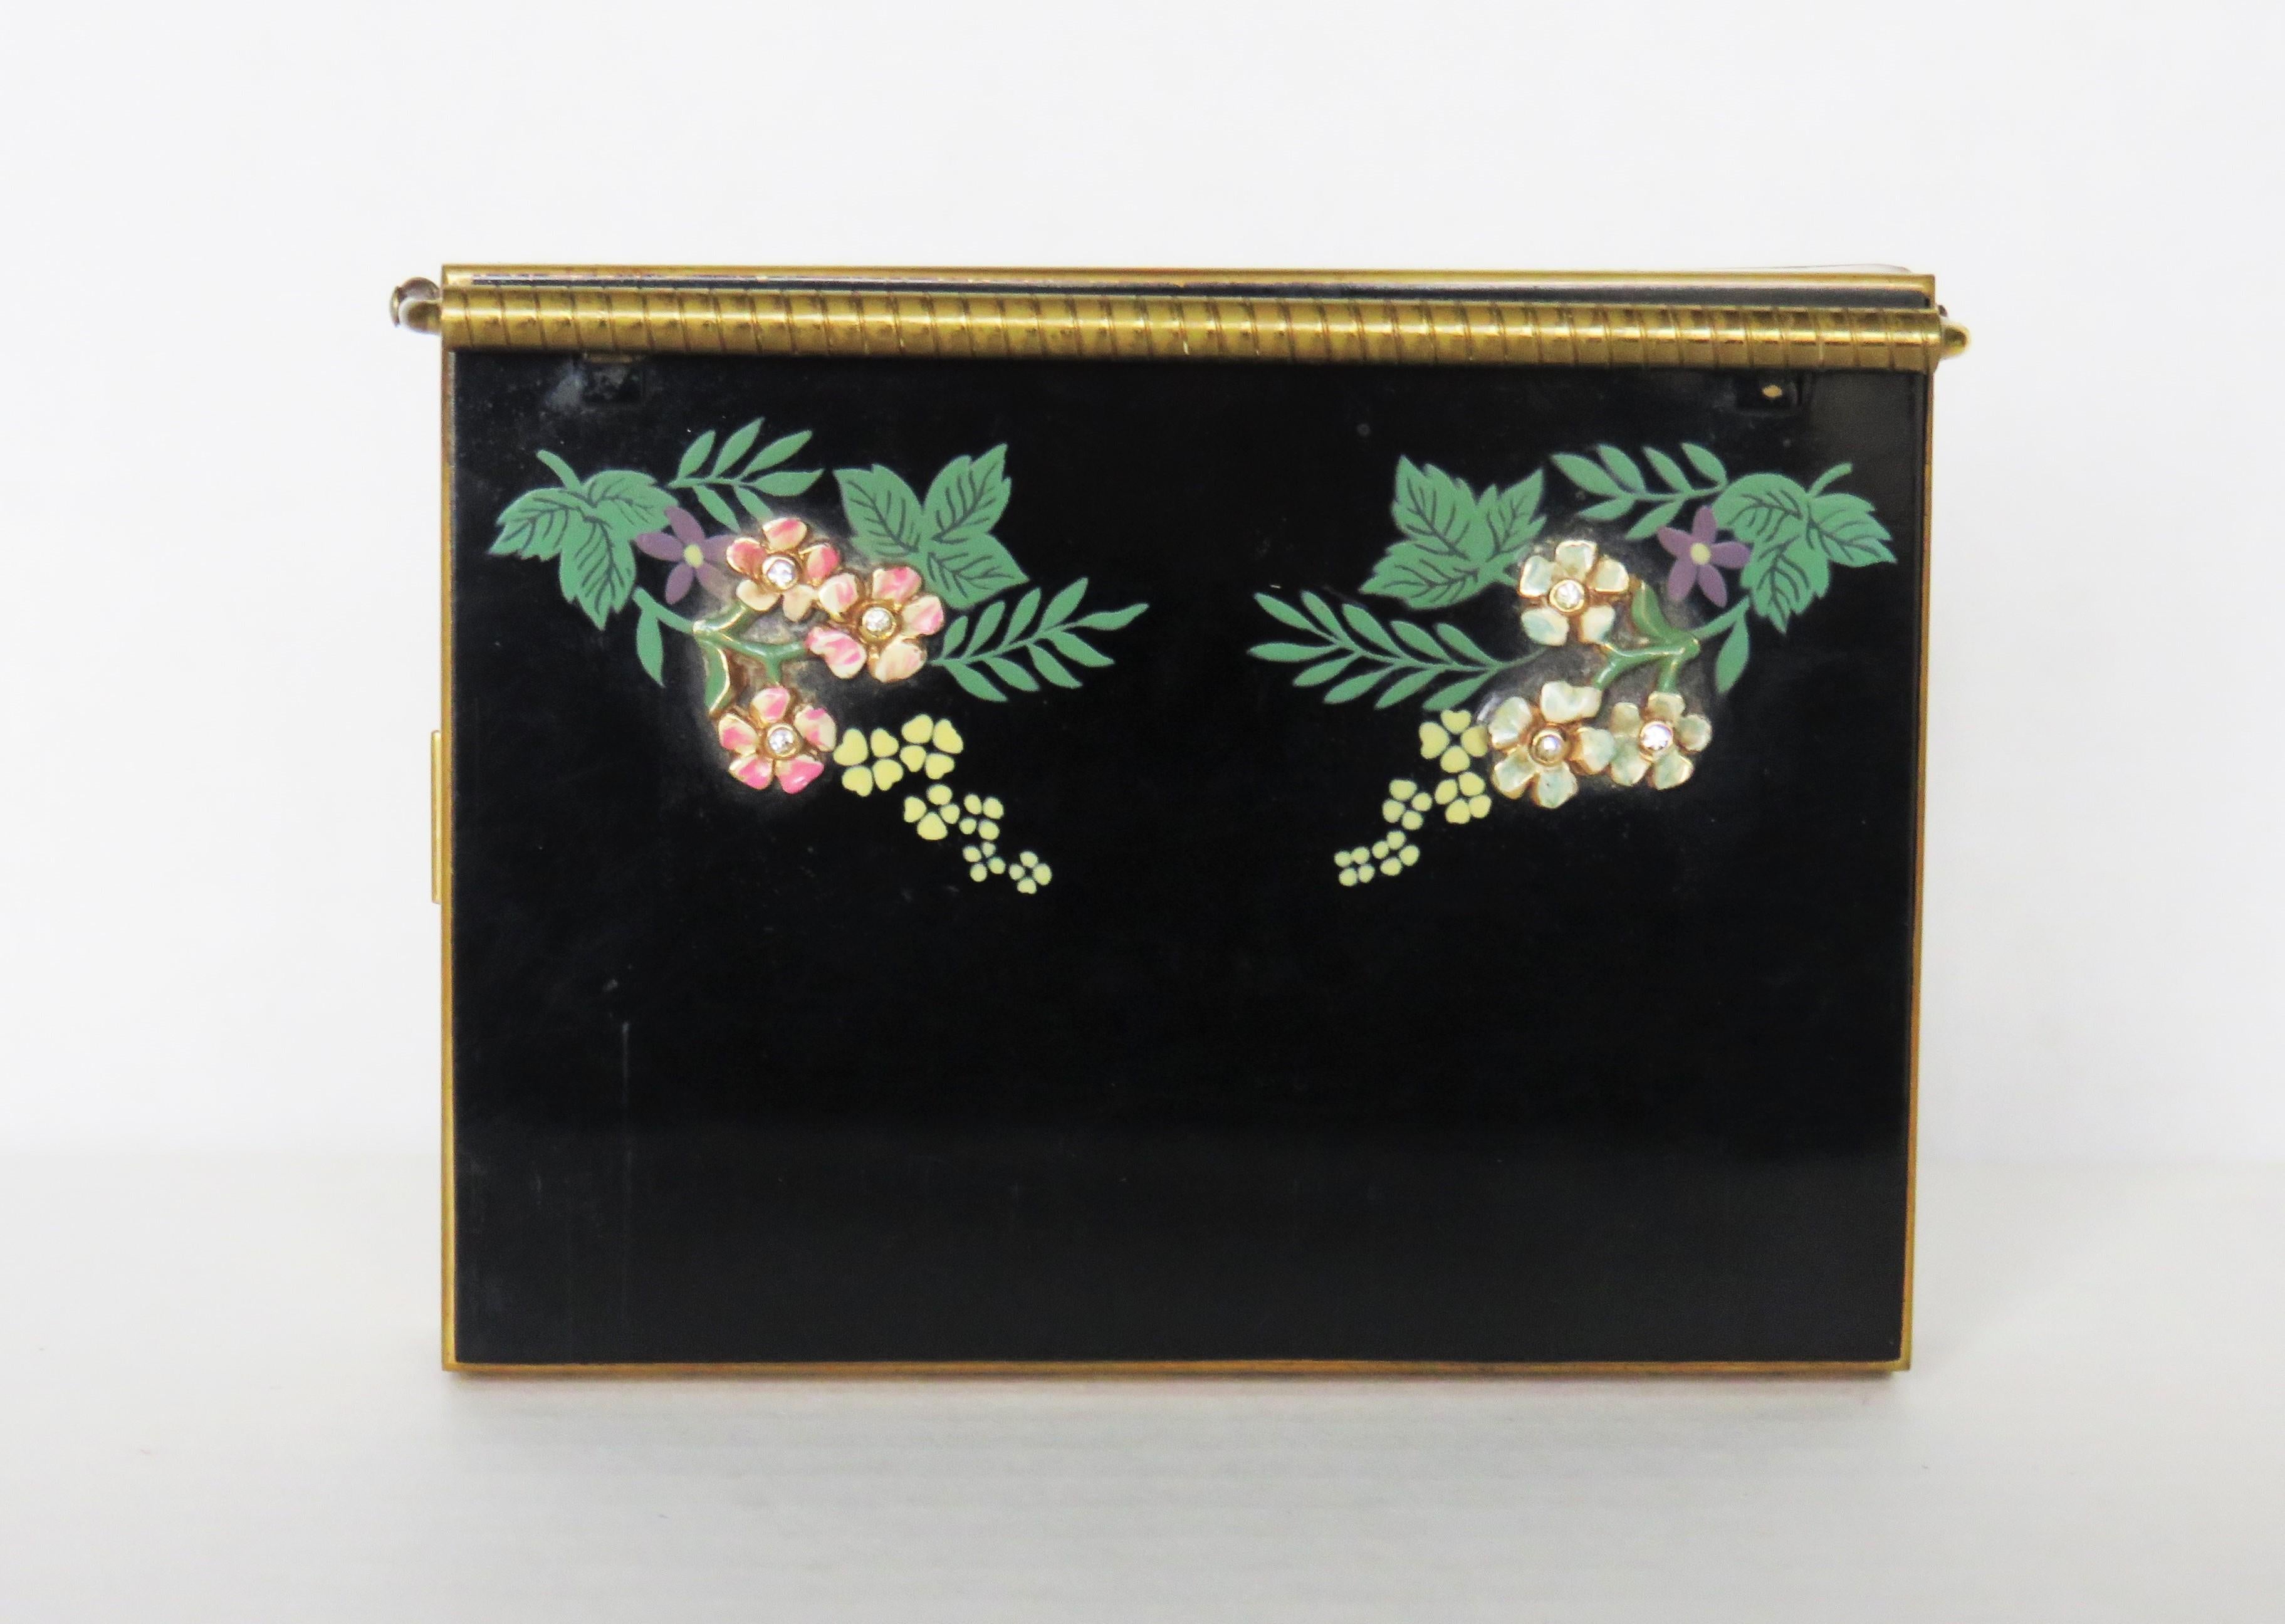 Volupte 1950s Enamel Flower Compact Miaudiere Purse and Case For Sale 4